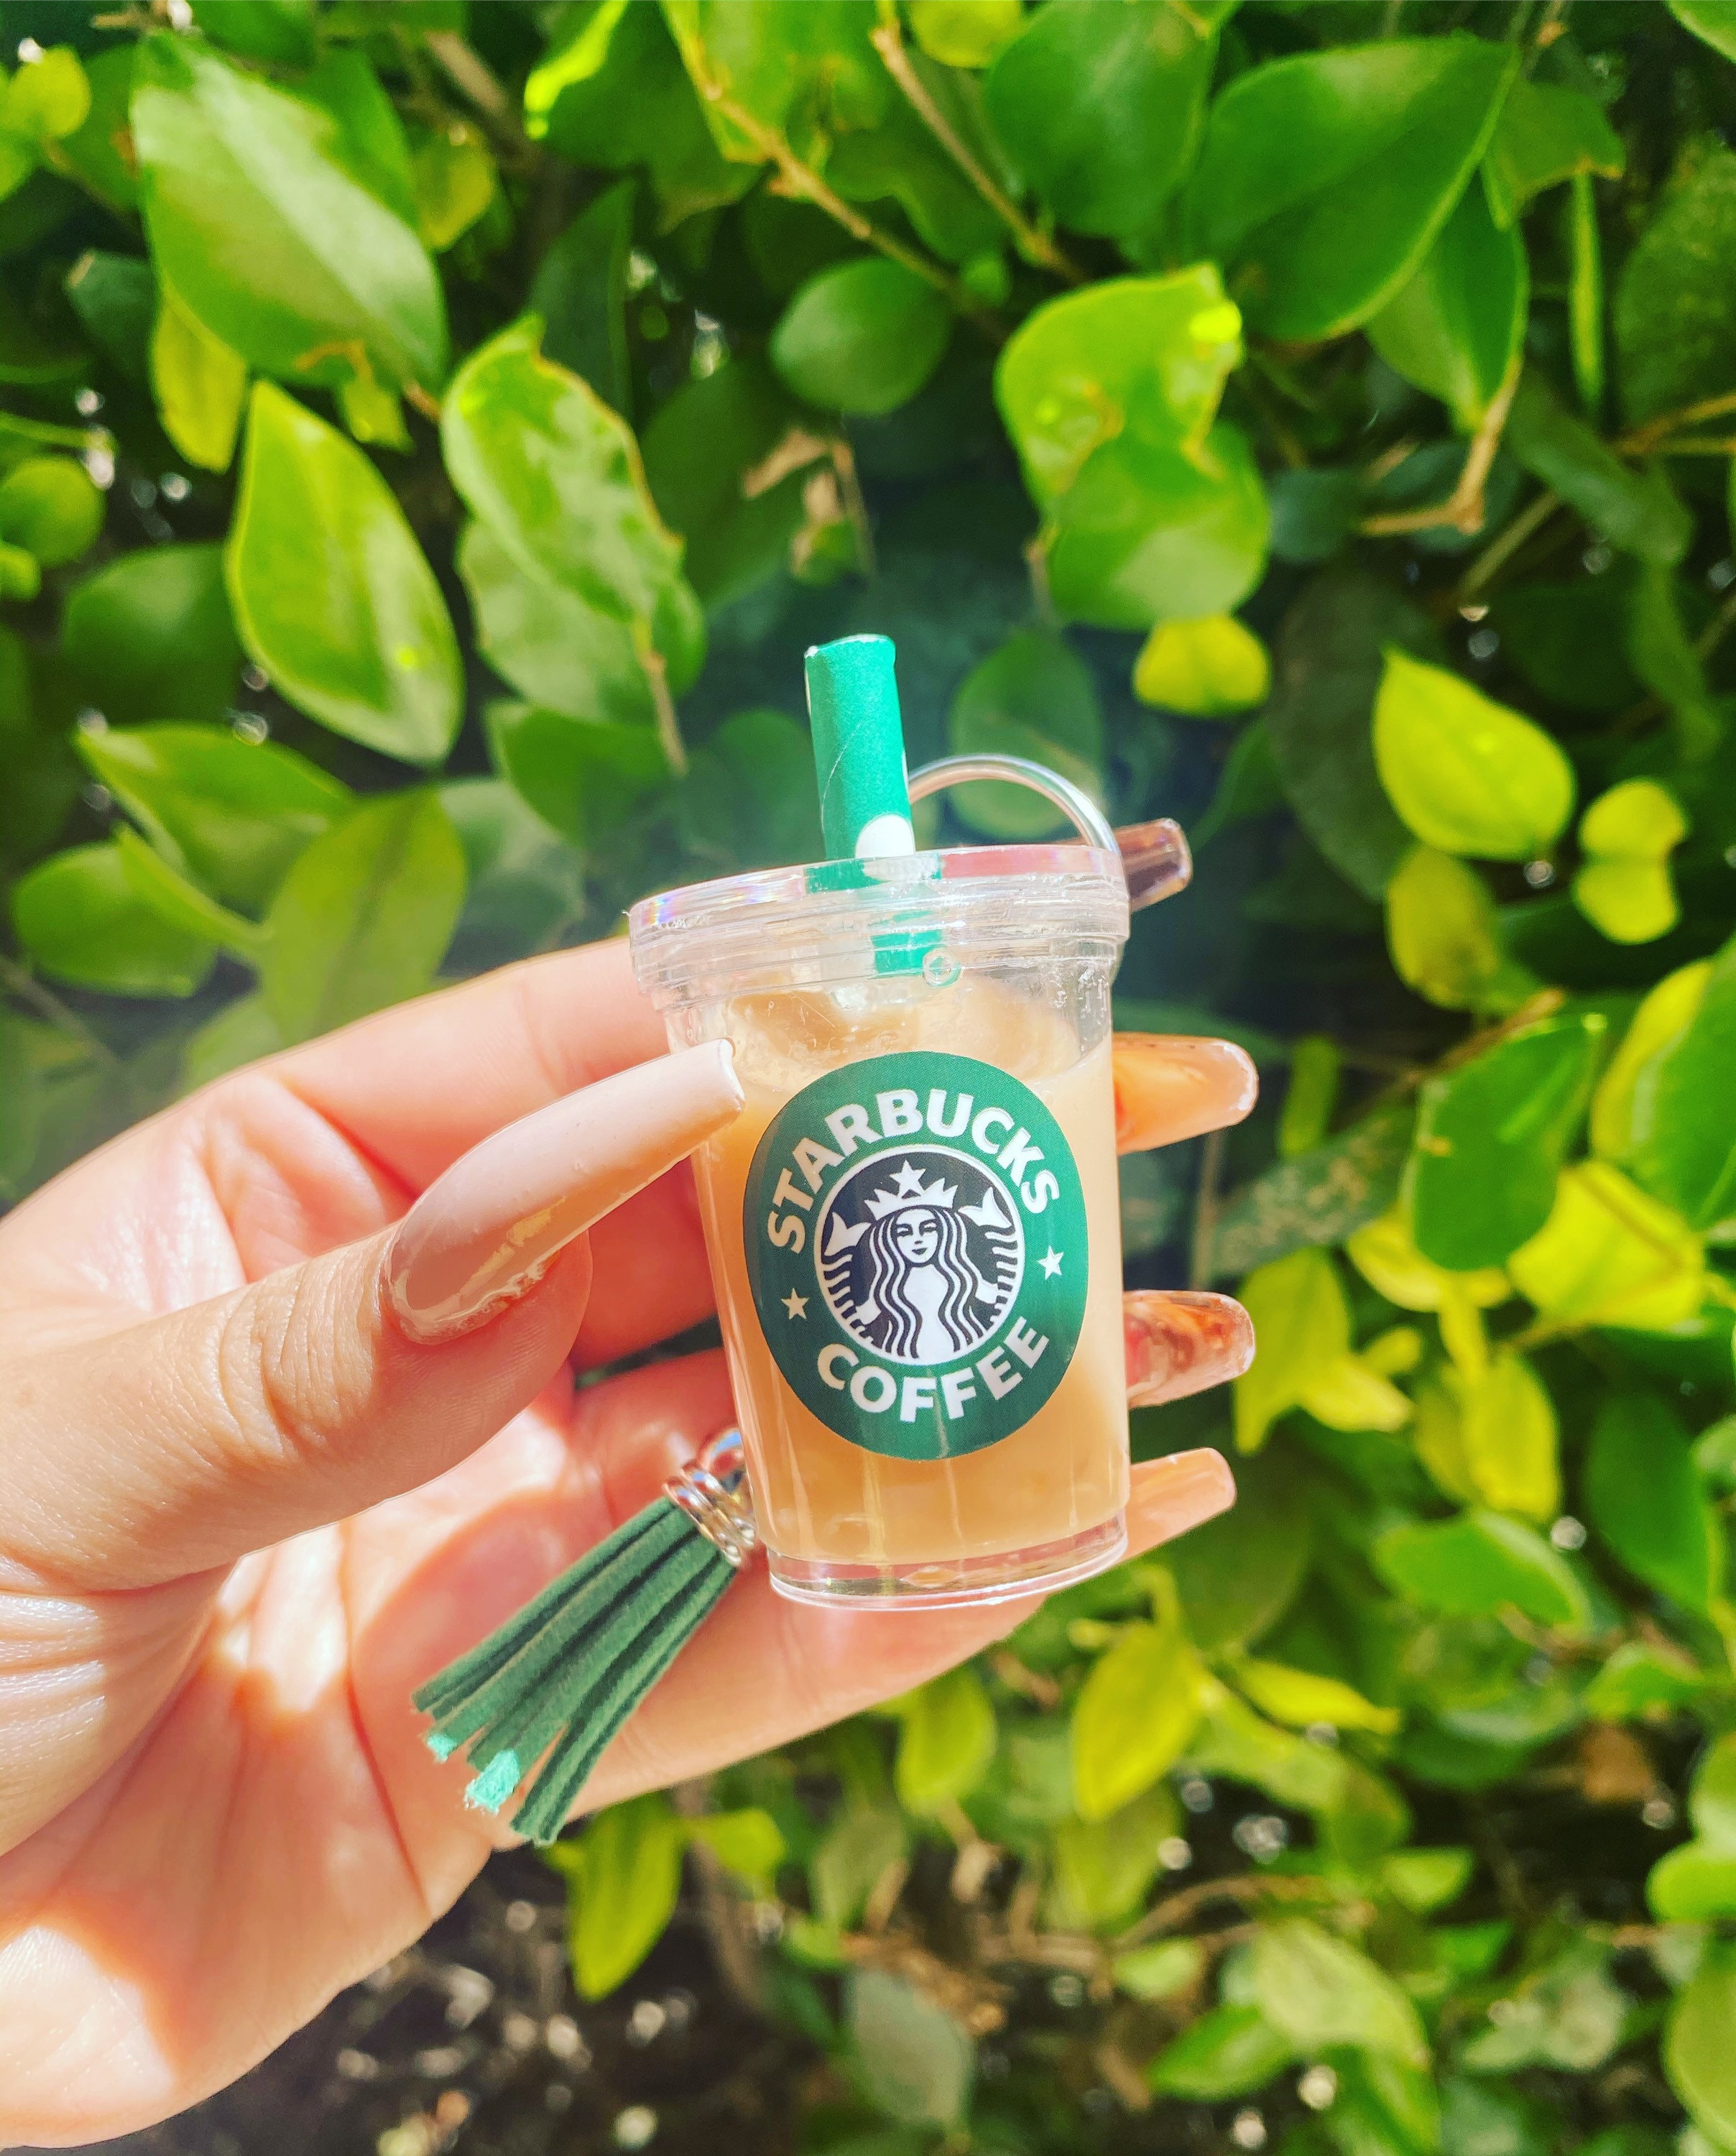 Studded Venti Cafe Cup 3D Printed Keychain, Starbucks Keychain, Venti Cup  Keychain, Frappuccino Keychain, Starbucks Accessories 